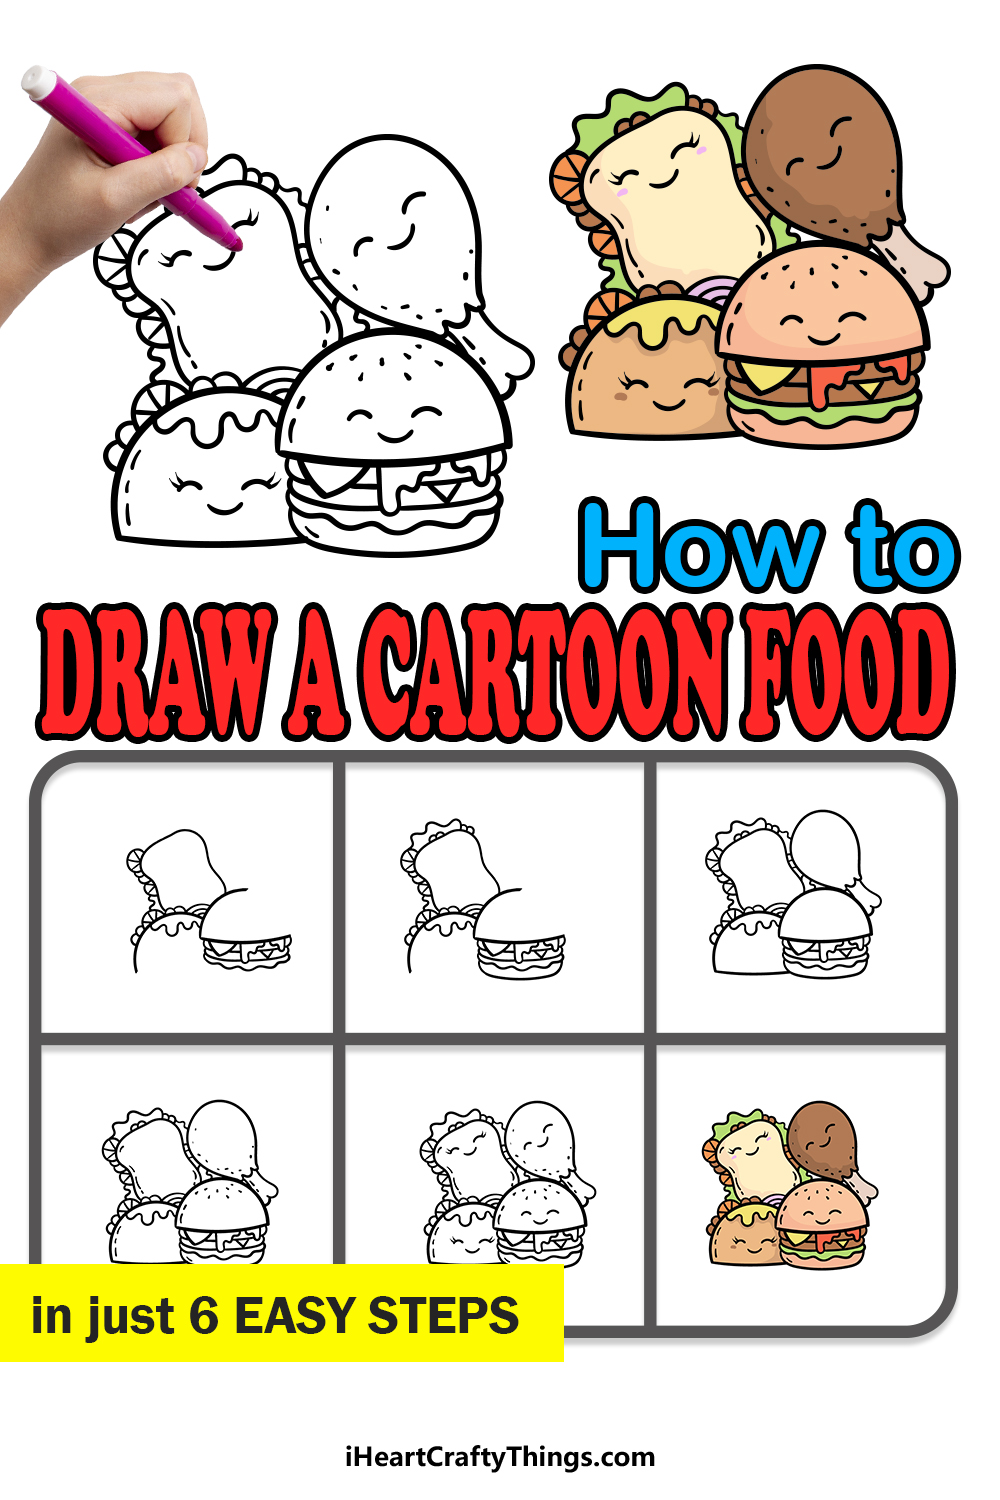 how to draw cartoon food in 6 easy steps